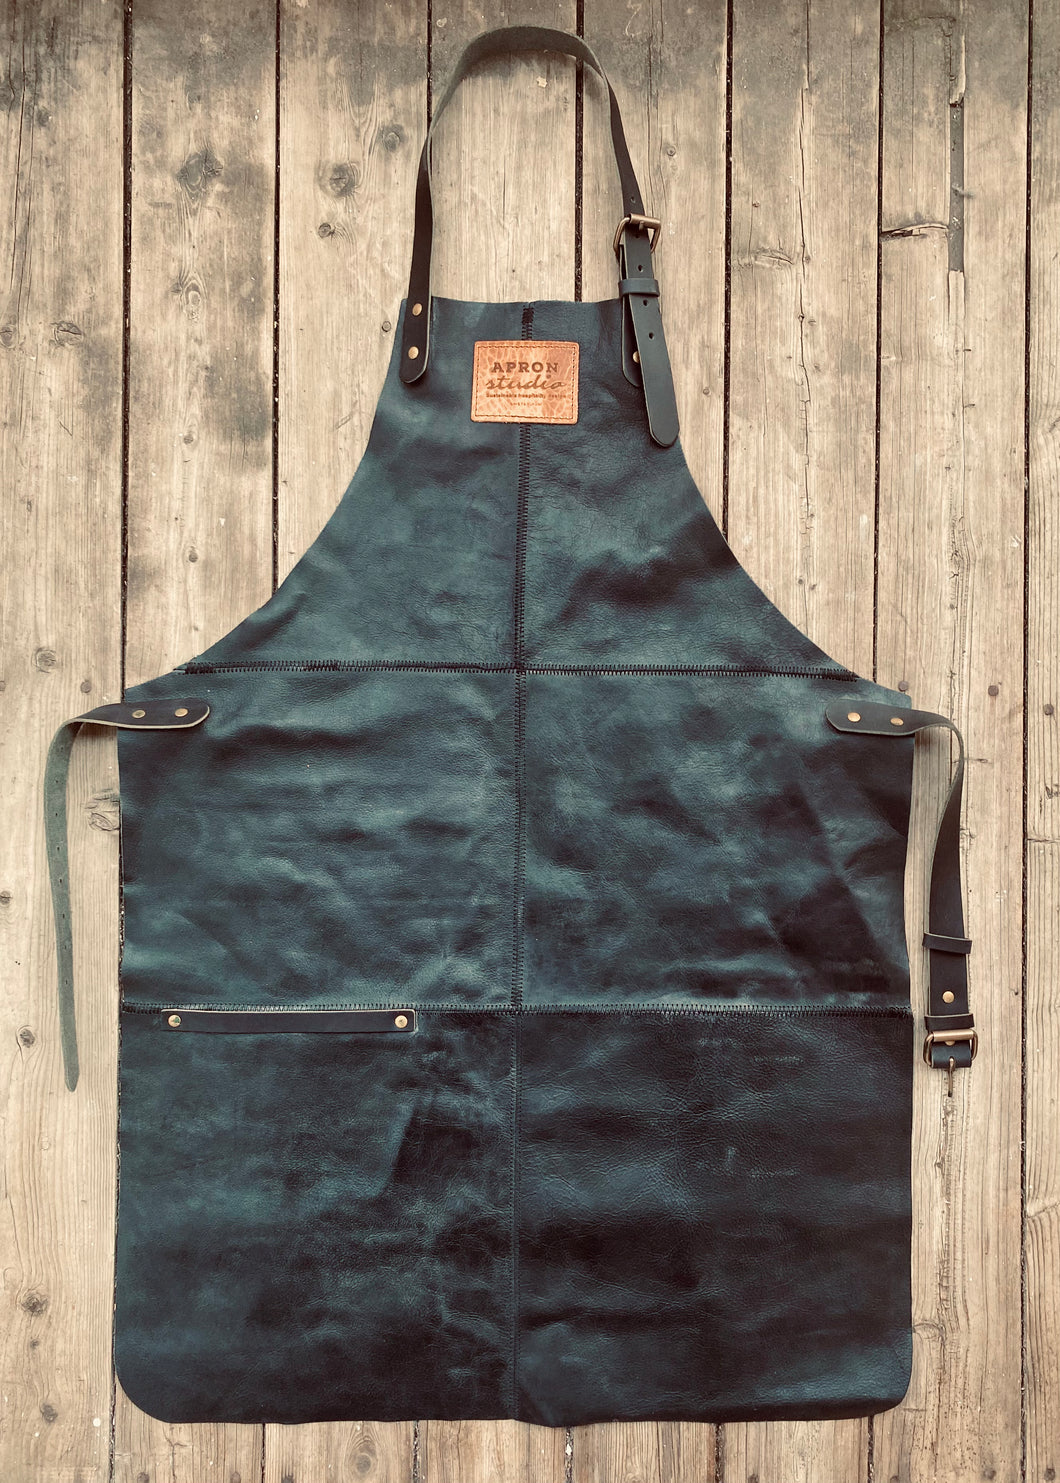 Upcycled leather Patchwork Apron -  Circular Apron -  recycled handmade apron.